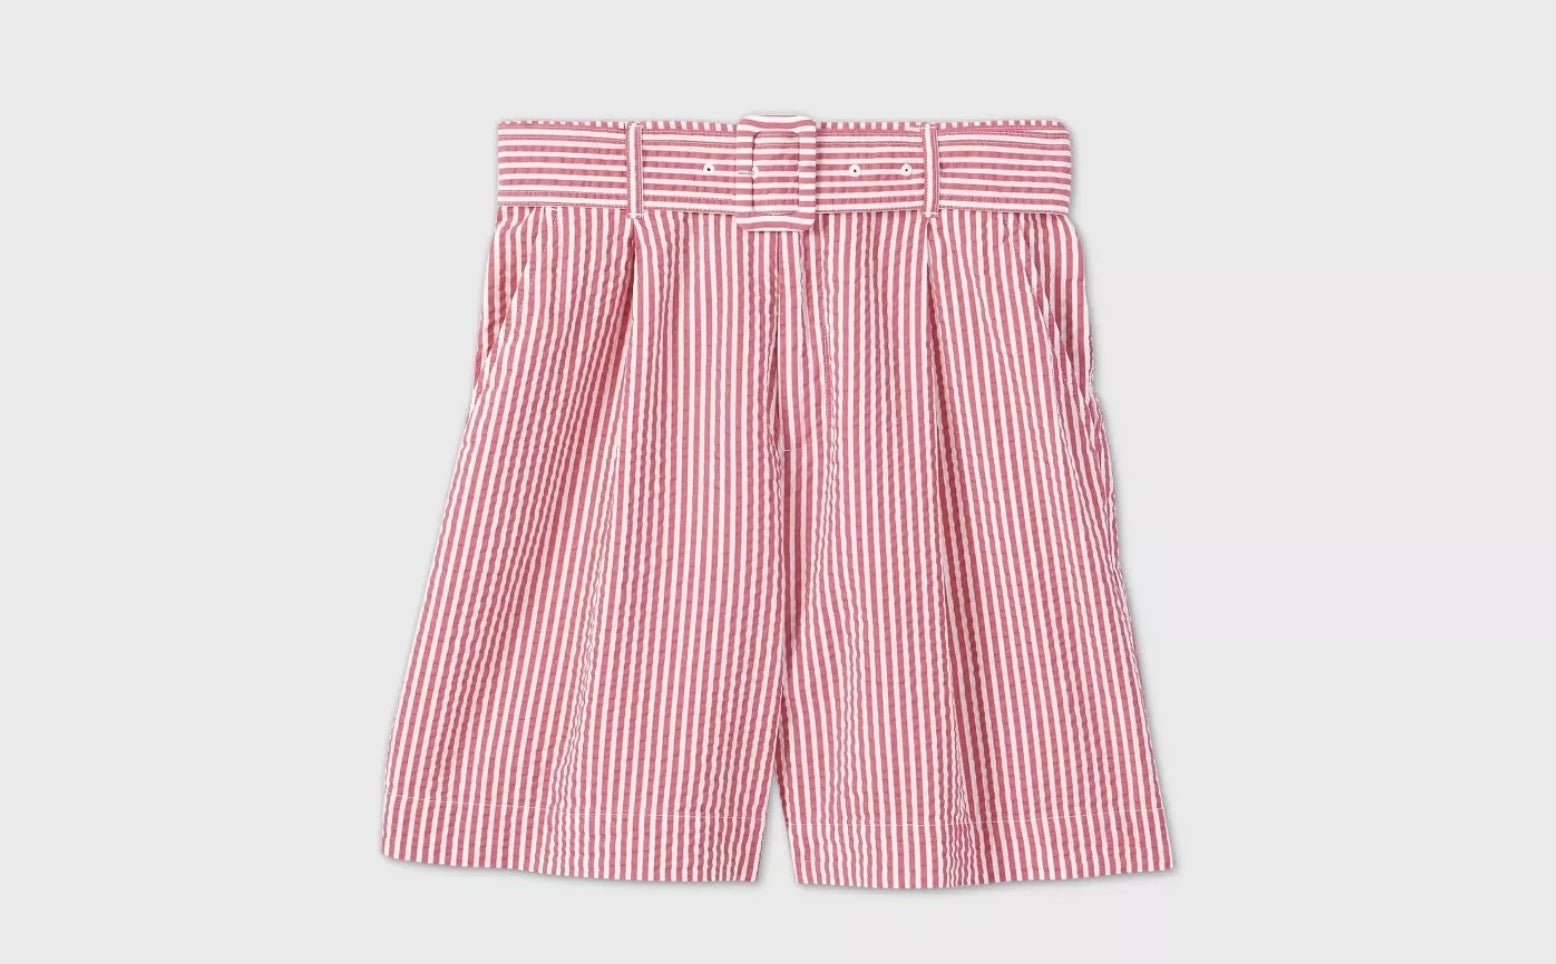 An image of red and white striped high-waisted shorts with a thick belt